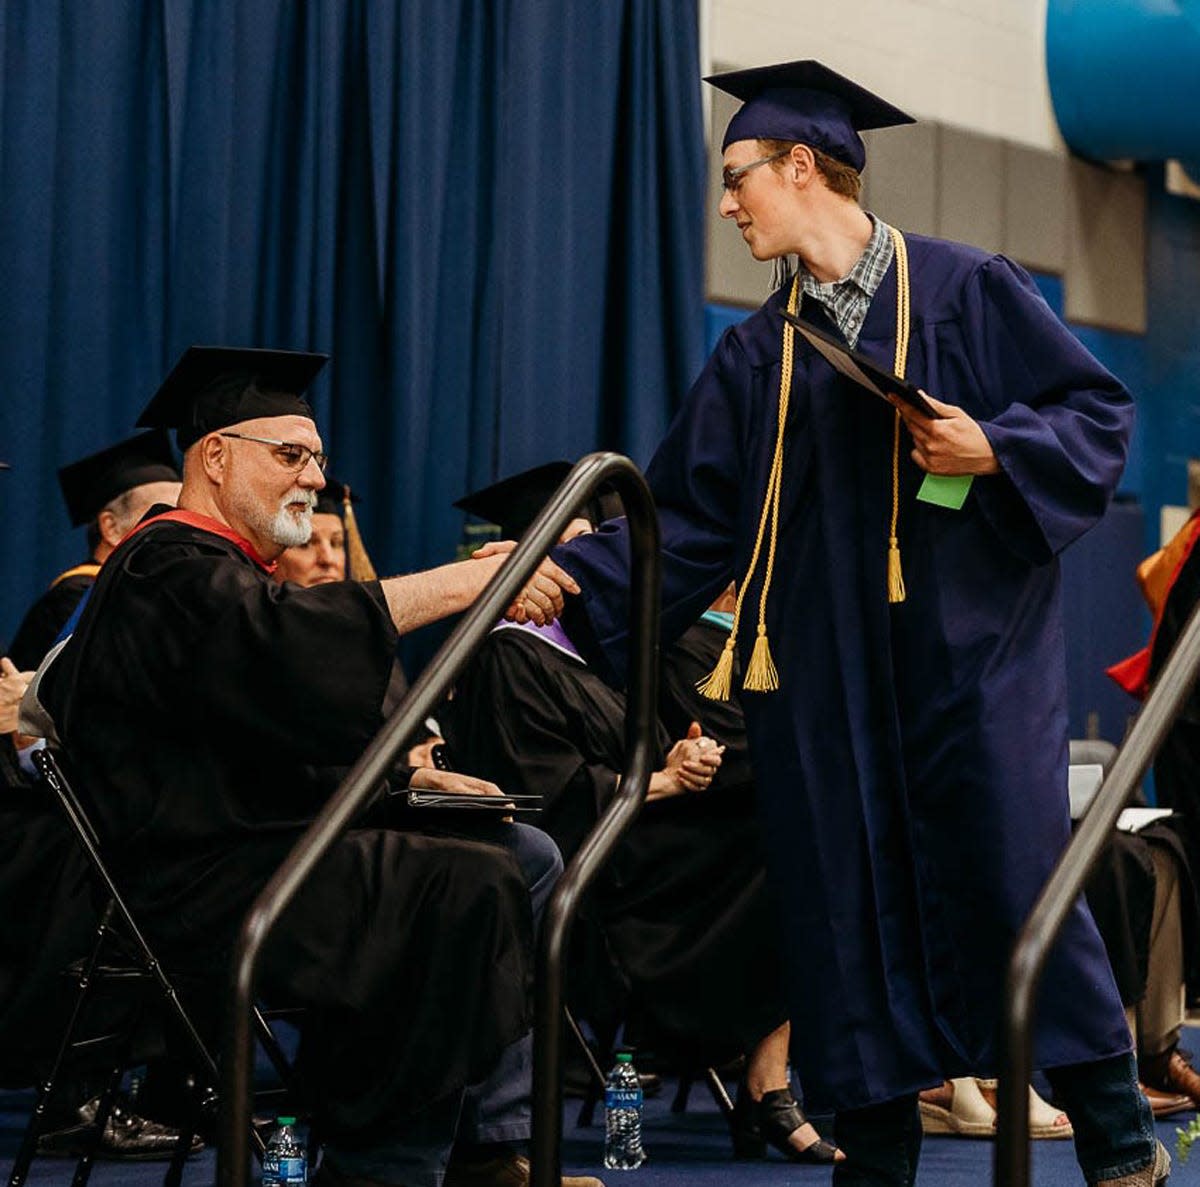 Daniel Hammond crosses the stage during the Spoon River College commencement ceremony. He and Matthew Schaad were recipients of this year's Student Achievement Awards.